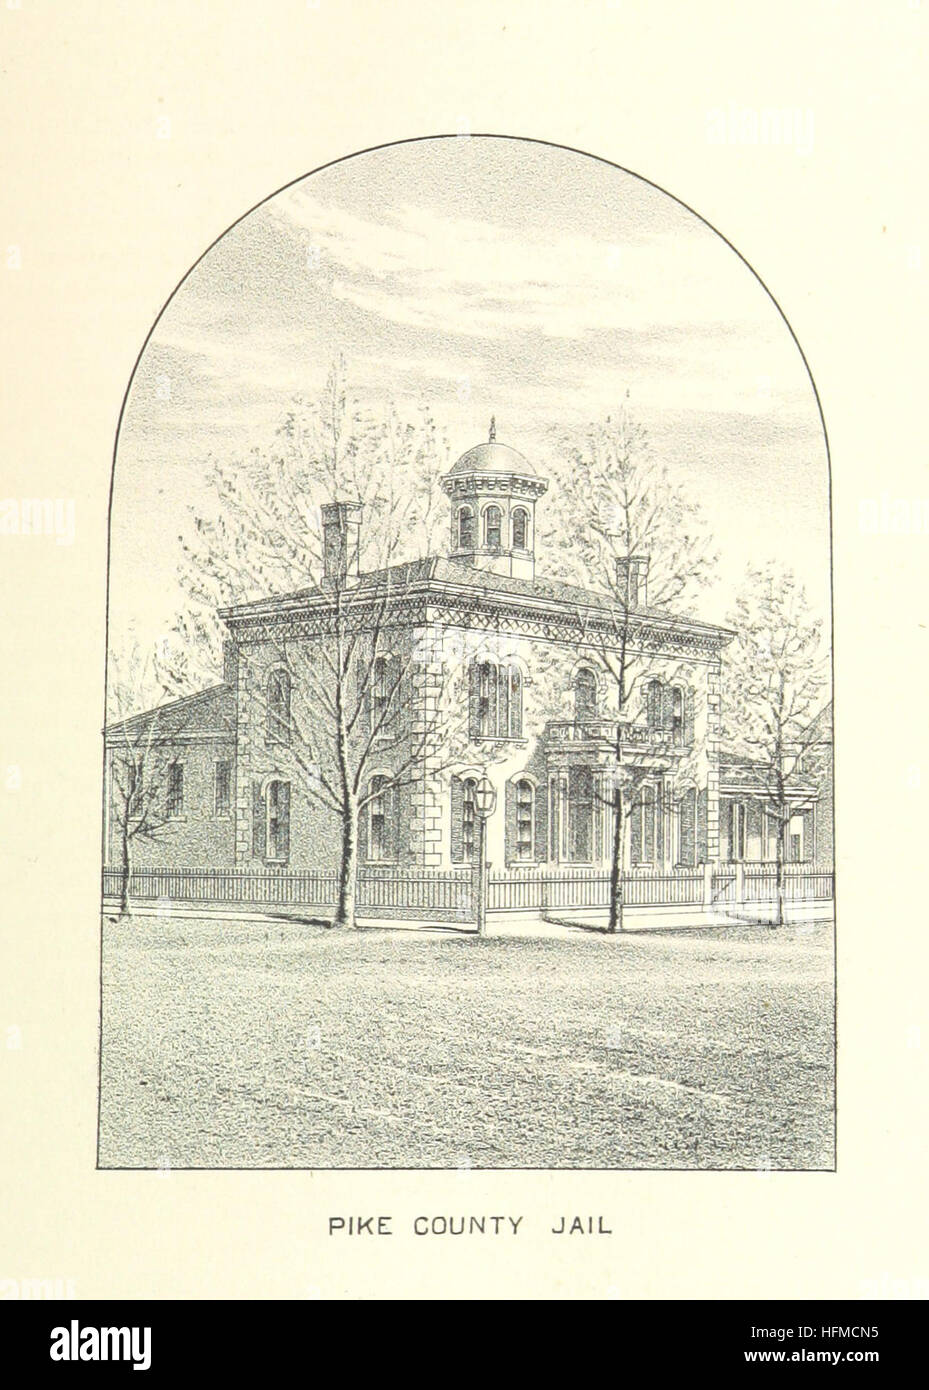 Image taken from page 339 of 'History of Pike County, Illinois; together with sketches of its cities, villages and townships, ... and biographies ... History of Illinois ... Illustrated' Image taken from page 339 of 'History of Pike County, Stock Photo